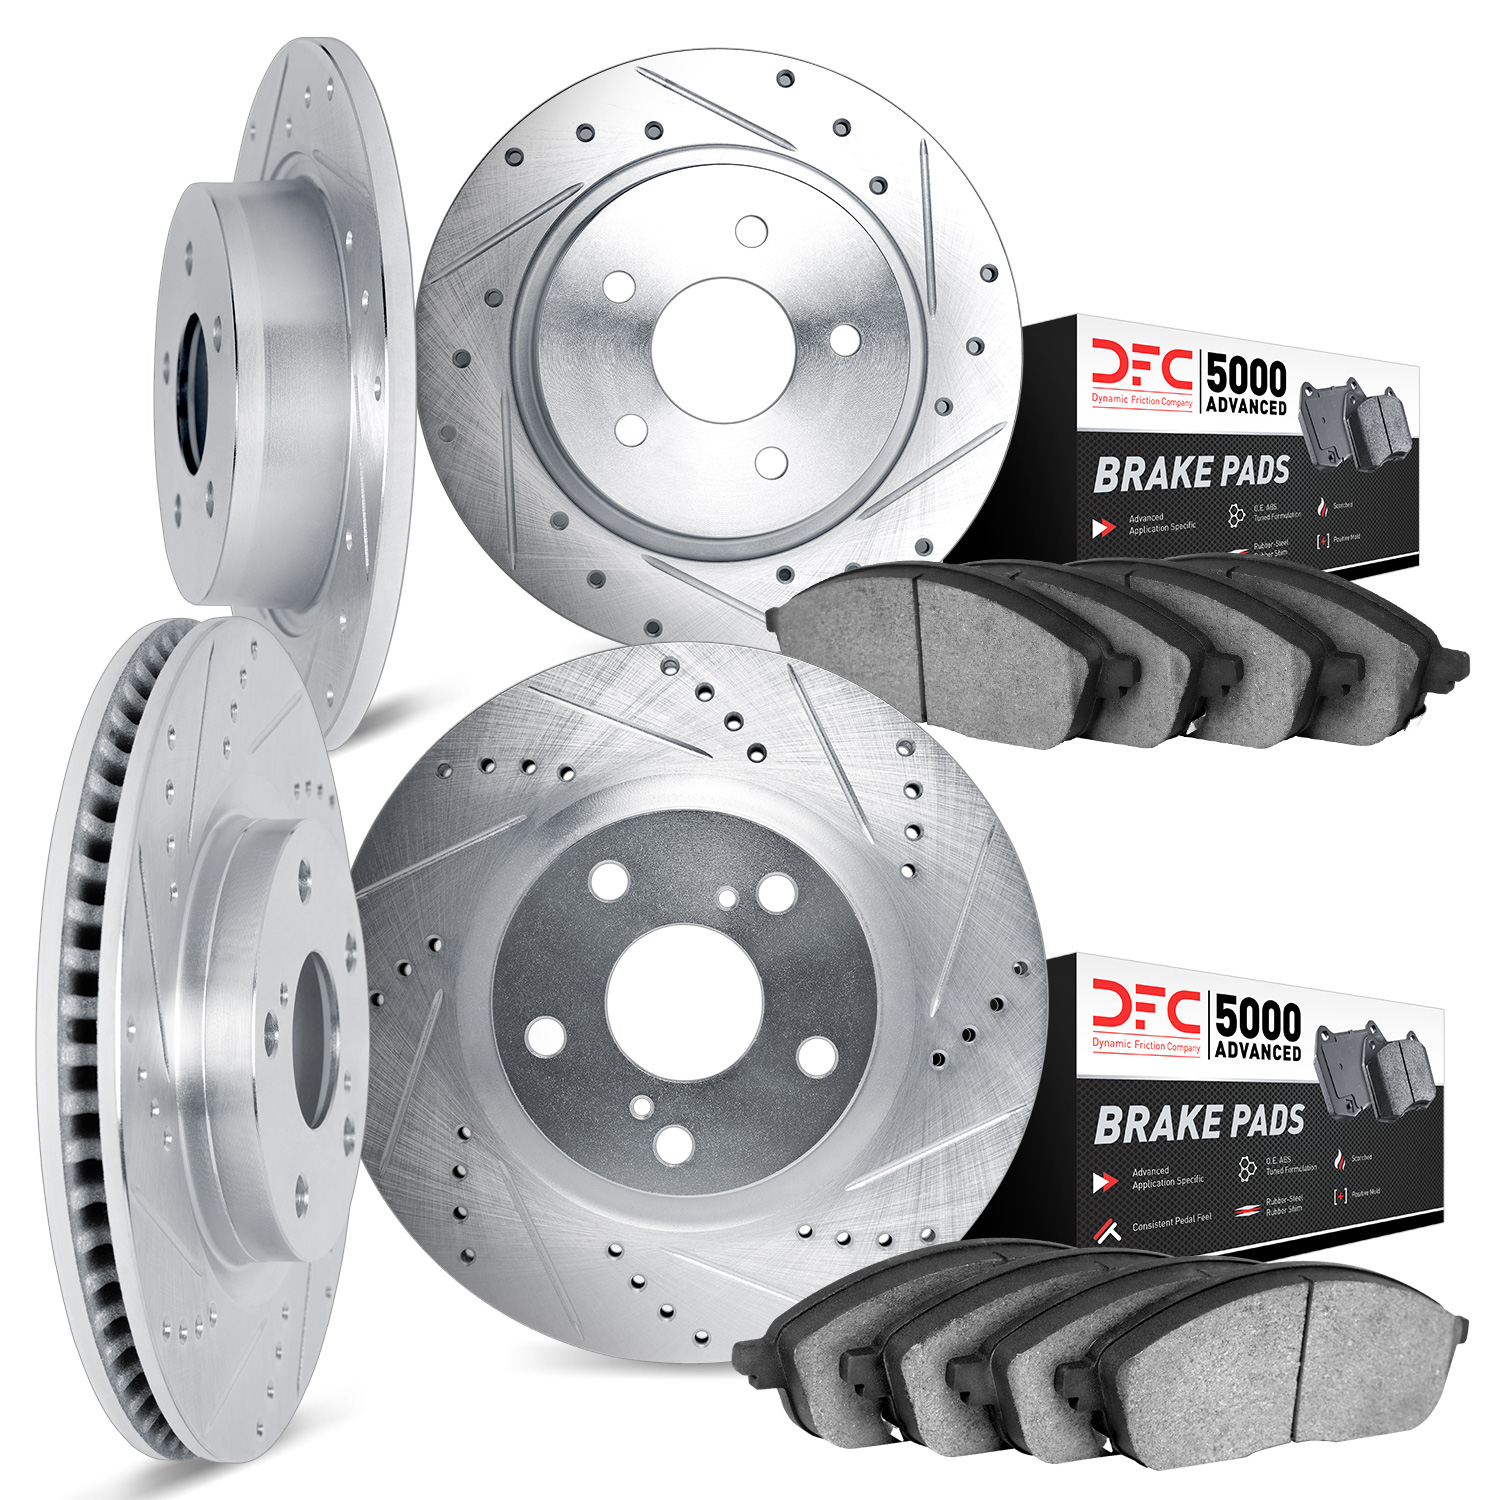 7504-31000 Drilled/Slotted Brake Rotors w/5000 Advanced Brake Pads Kit [Silver], 1979-1981 BMW, Position: Front and Rear